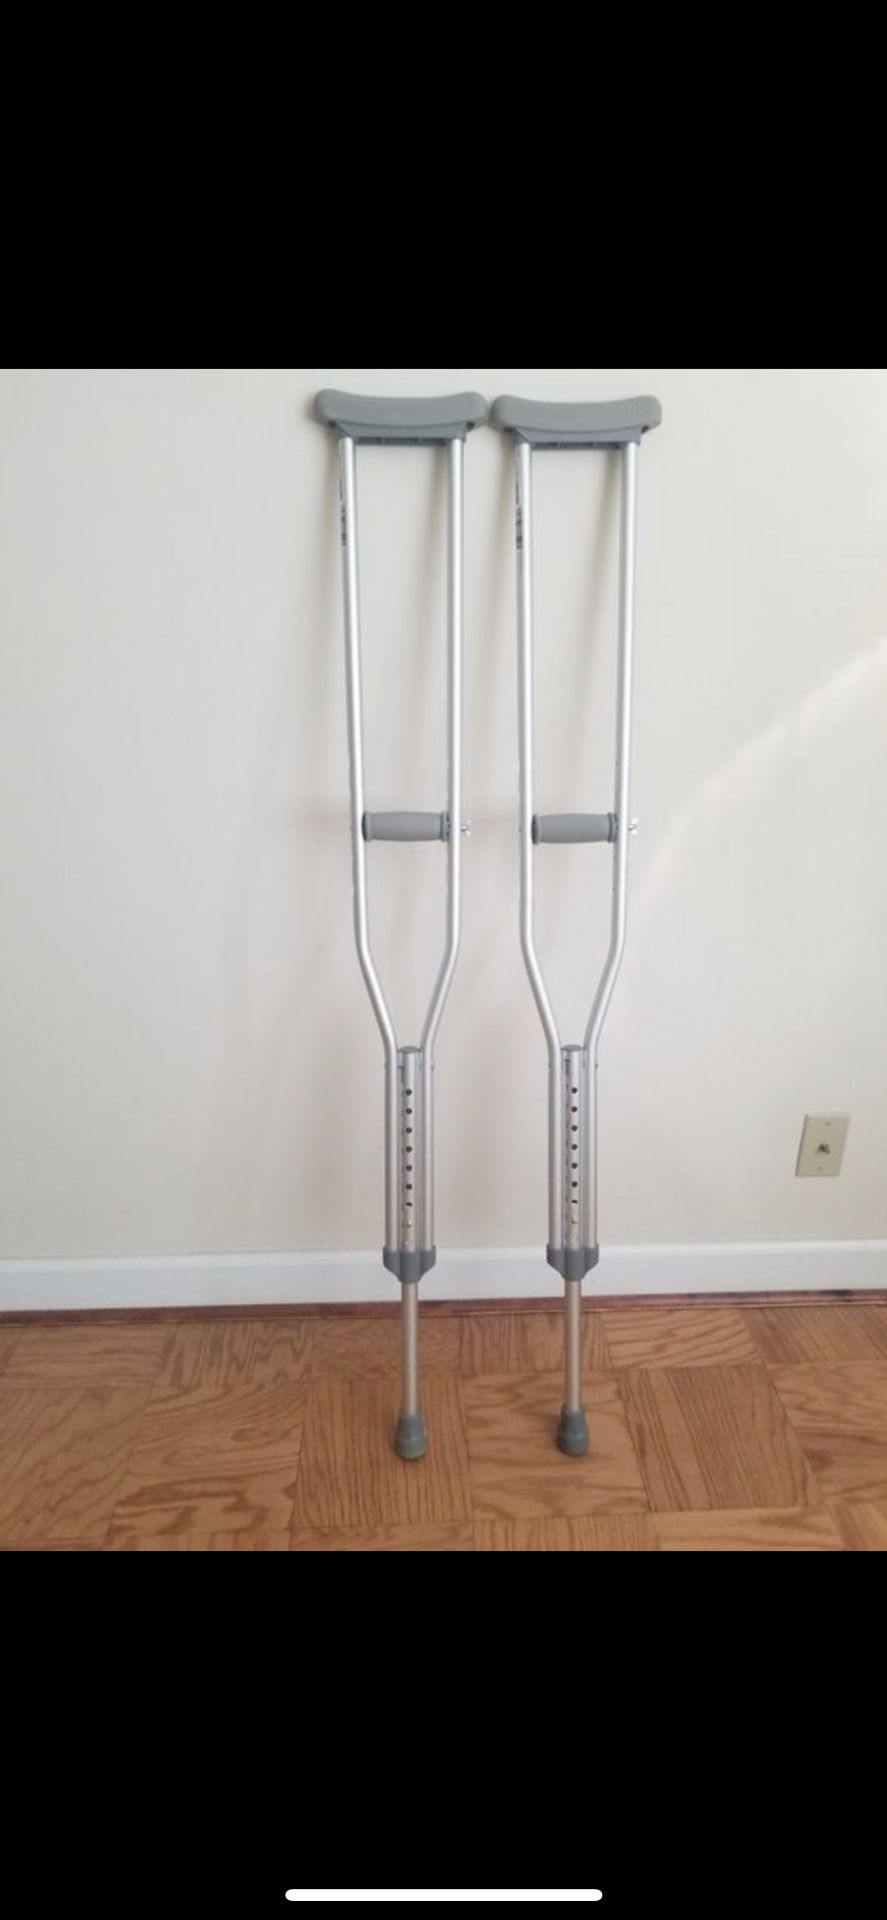 Brand new crutches with padding. Used just for a day for leg swell.